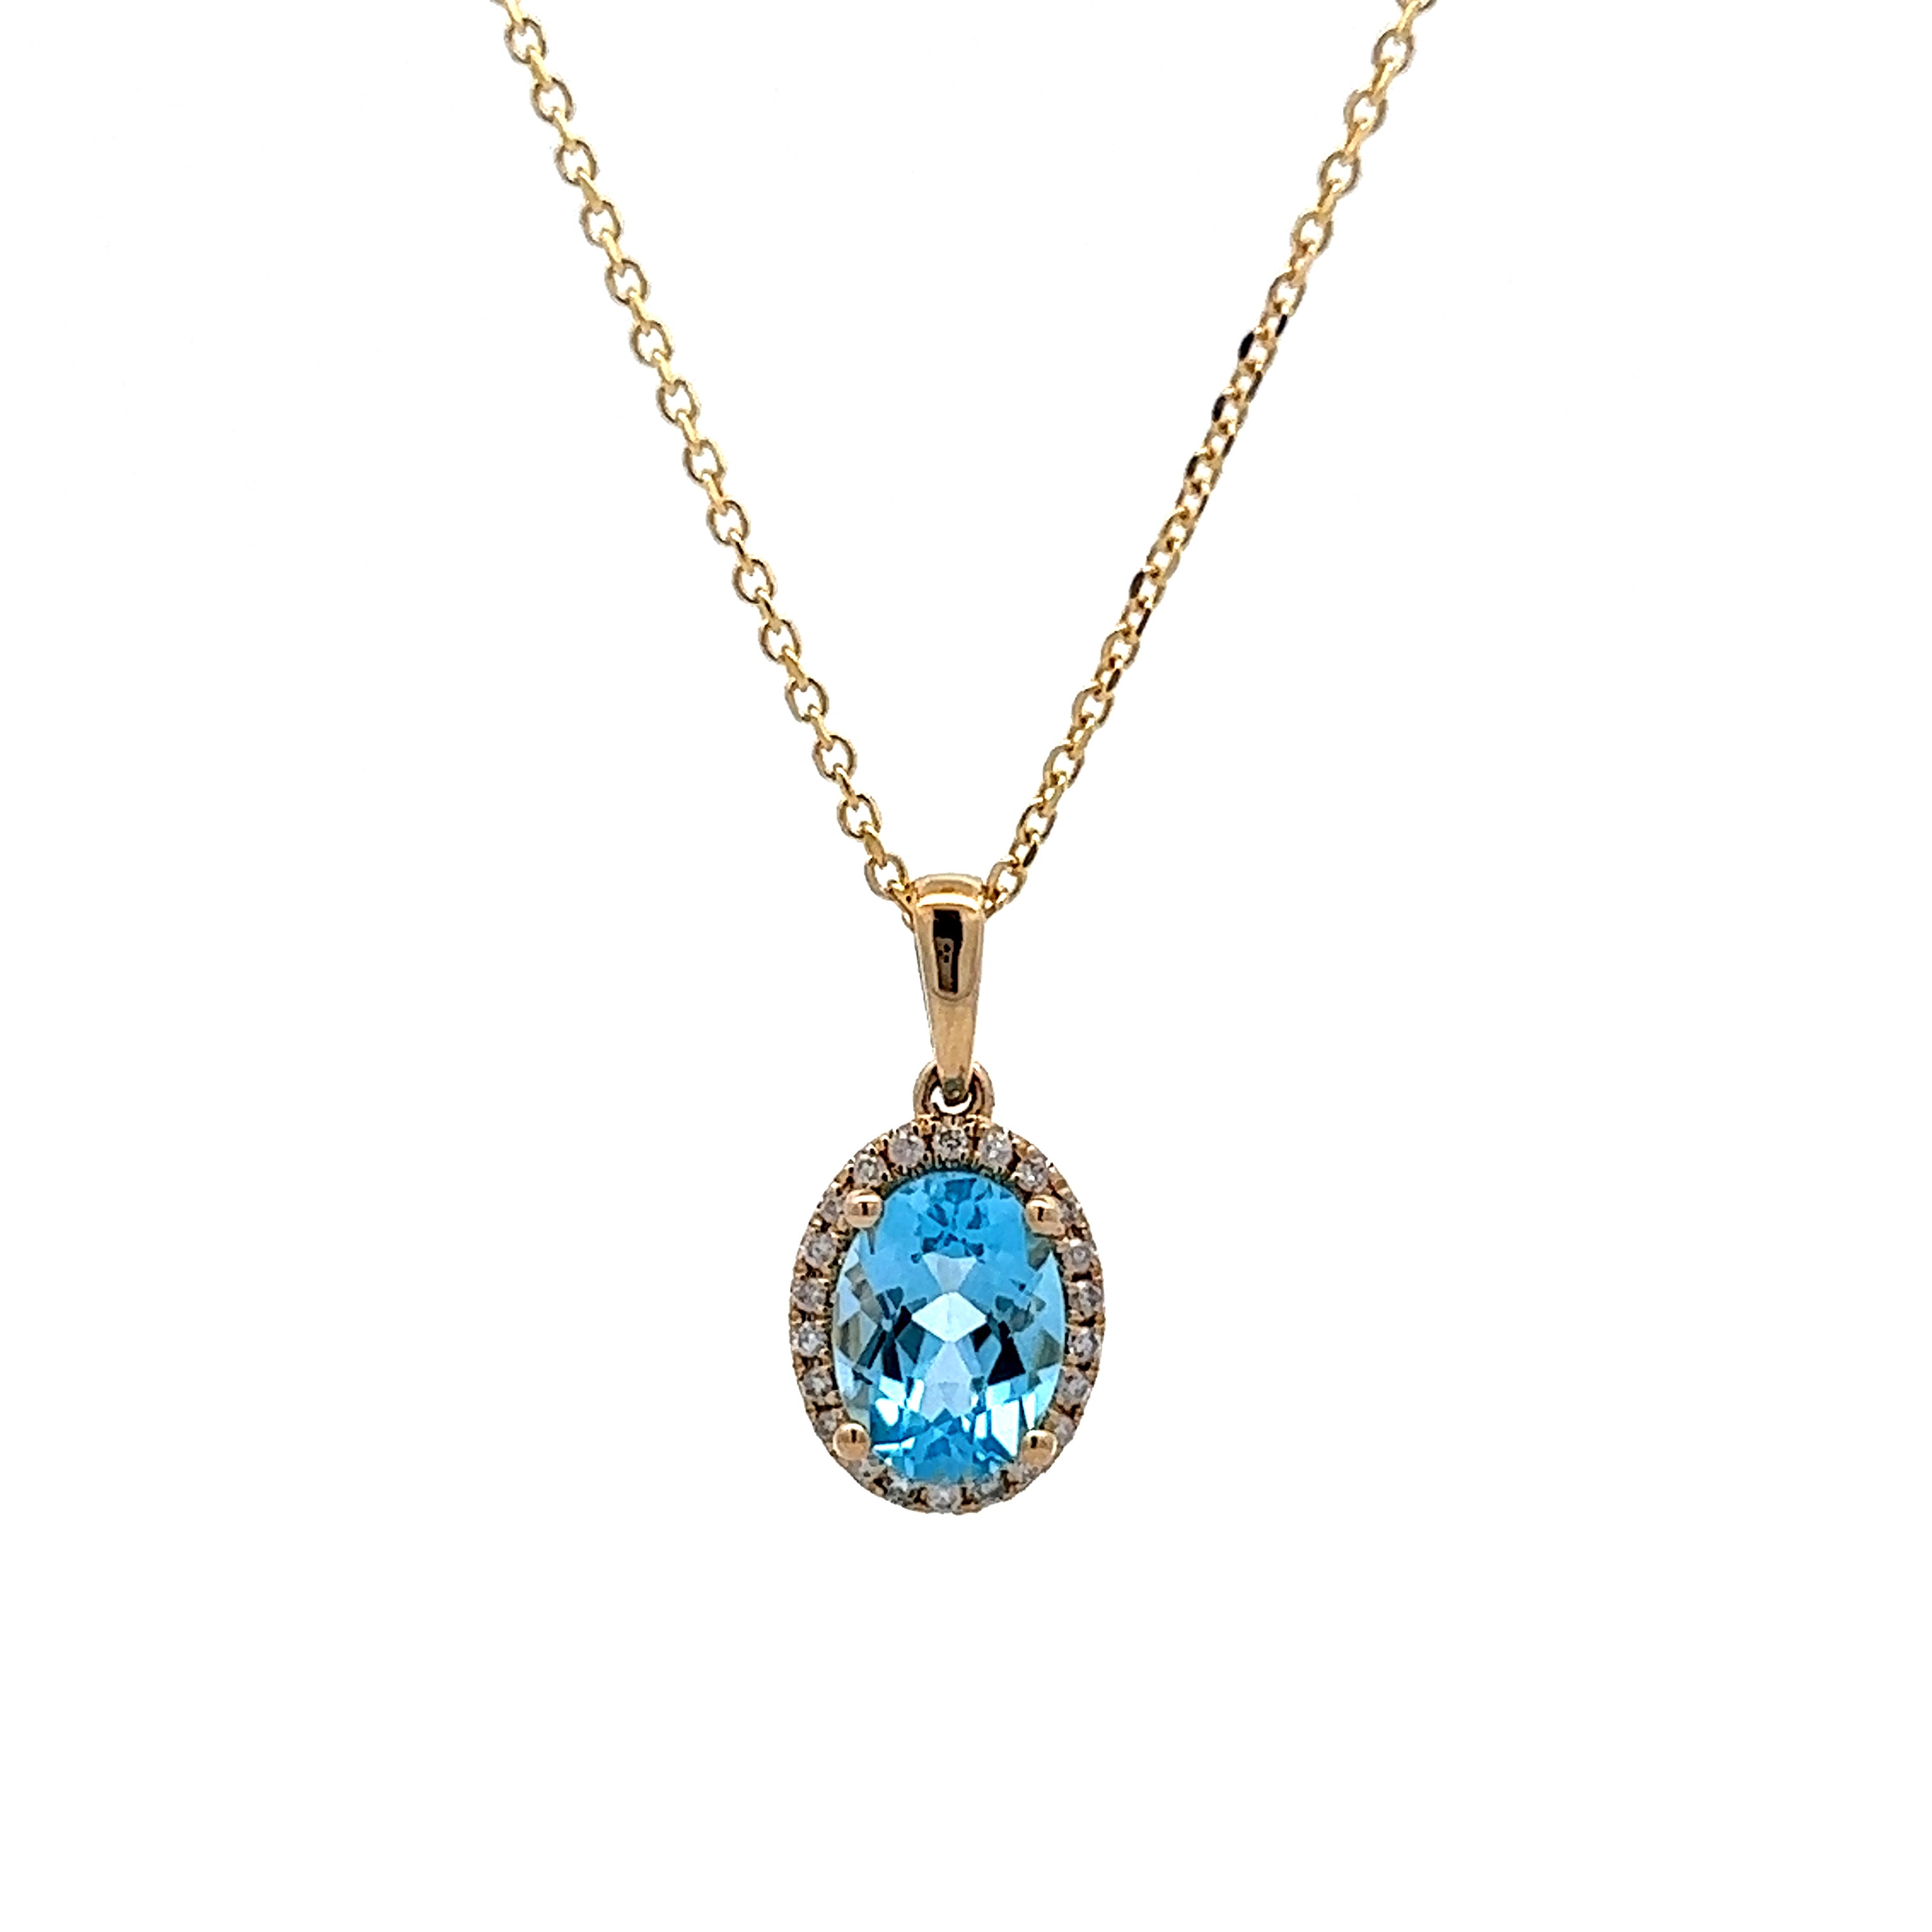 10K Yellow Gold Blue Topaz Pendant with Diamond Accents